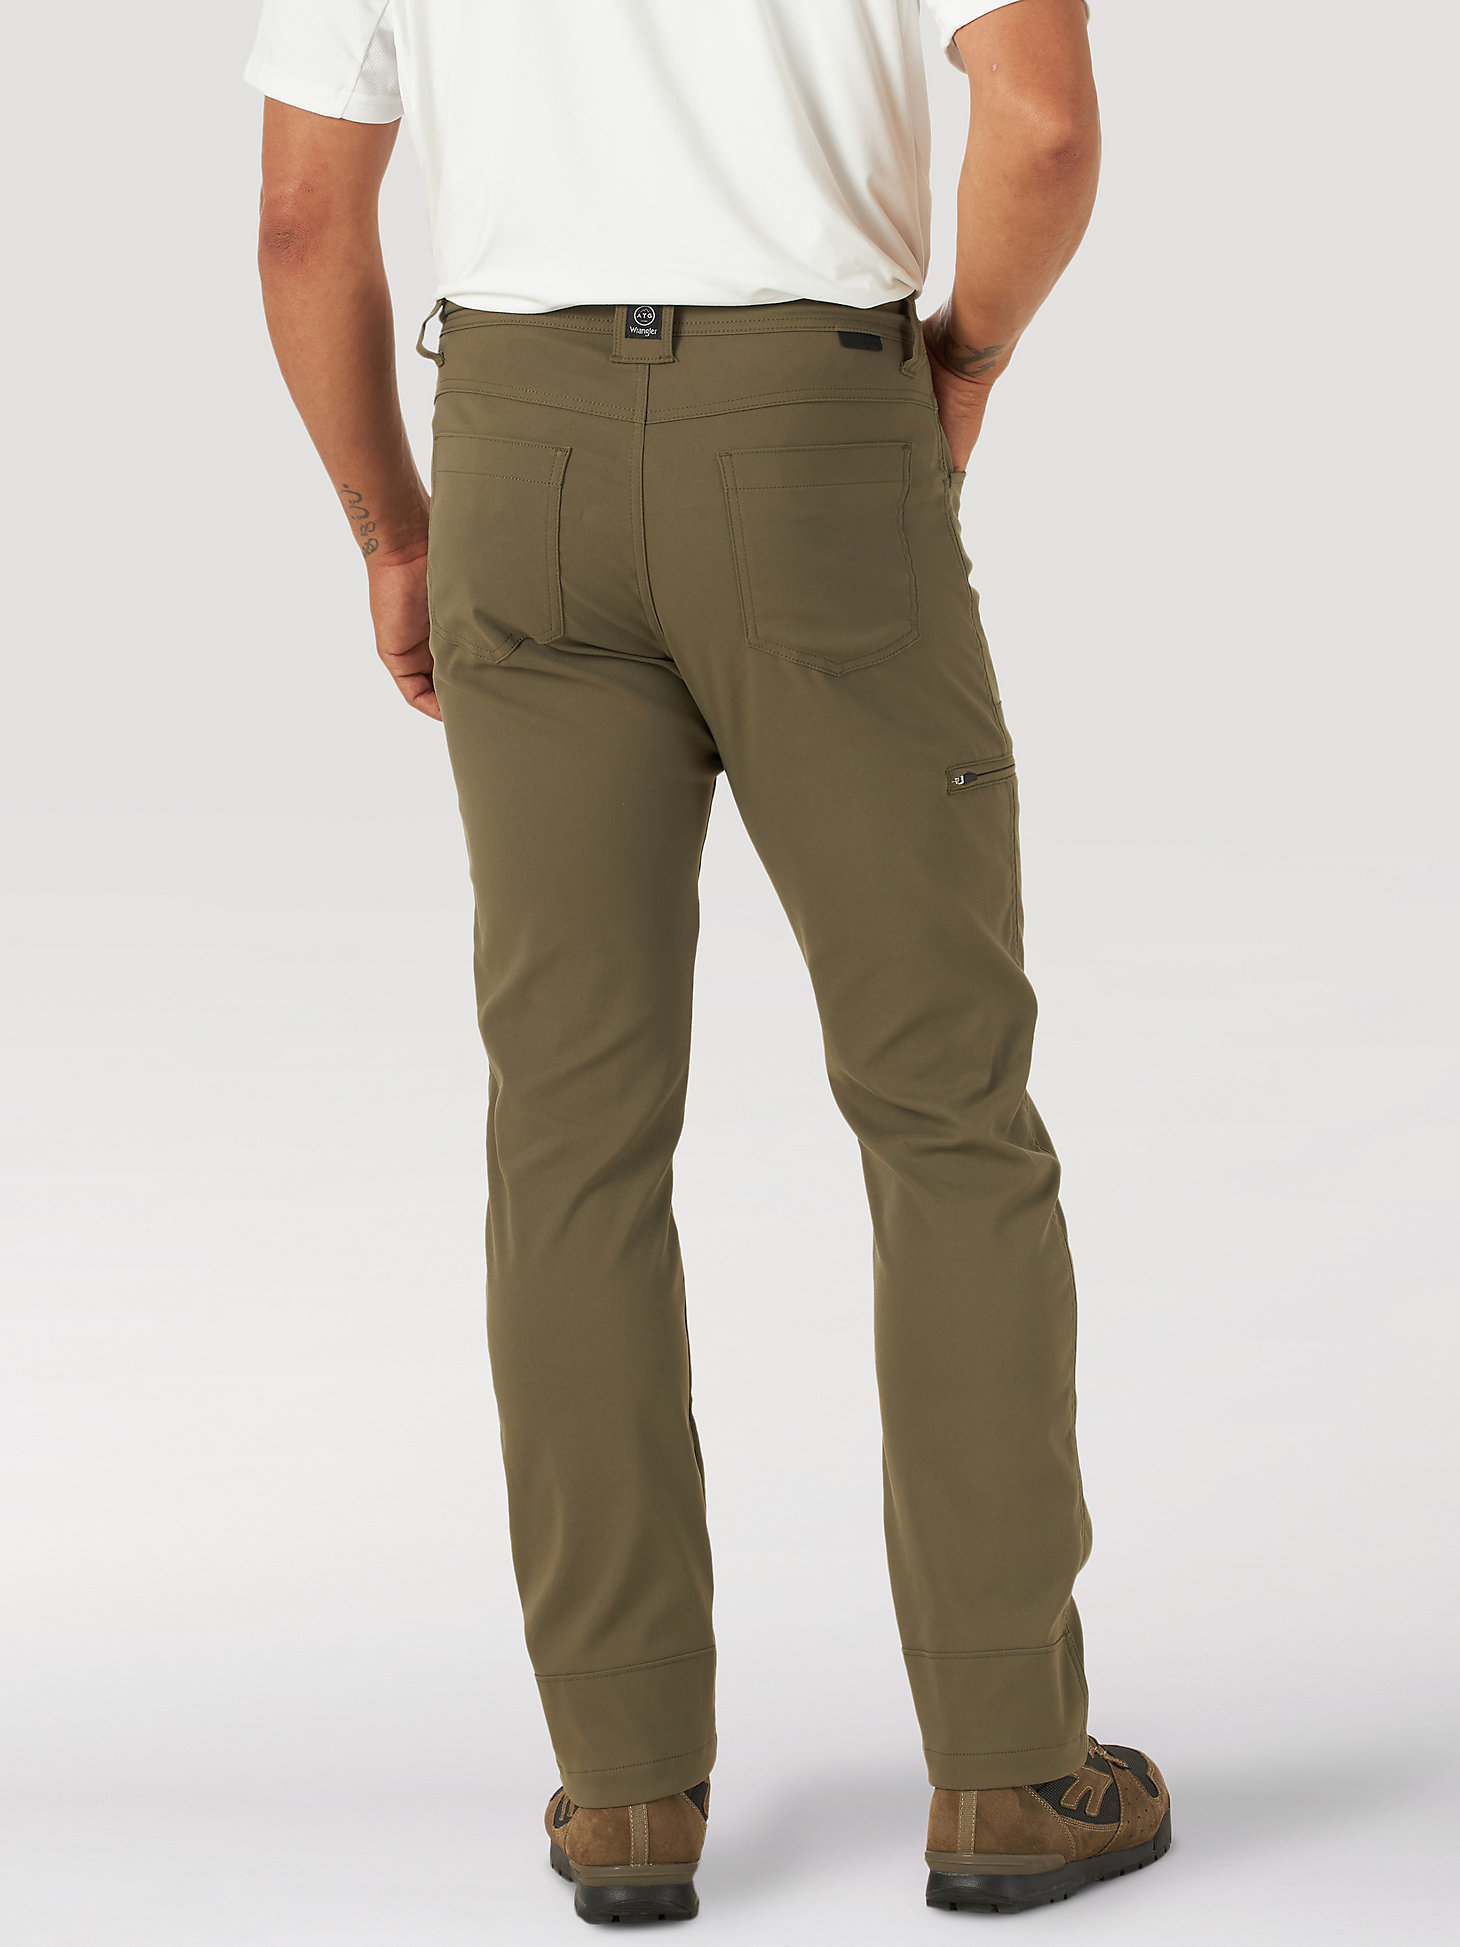 ATG by Wrangler™ Men's Synthetic Utility Pant in Sea Turtle alternative view 1